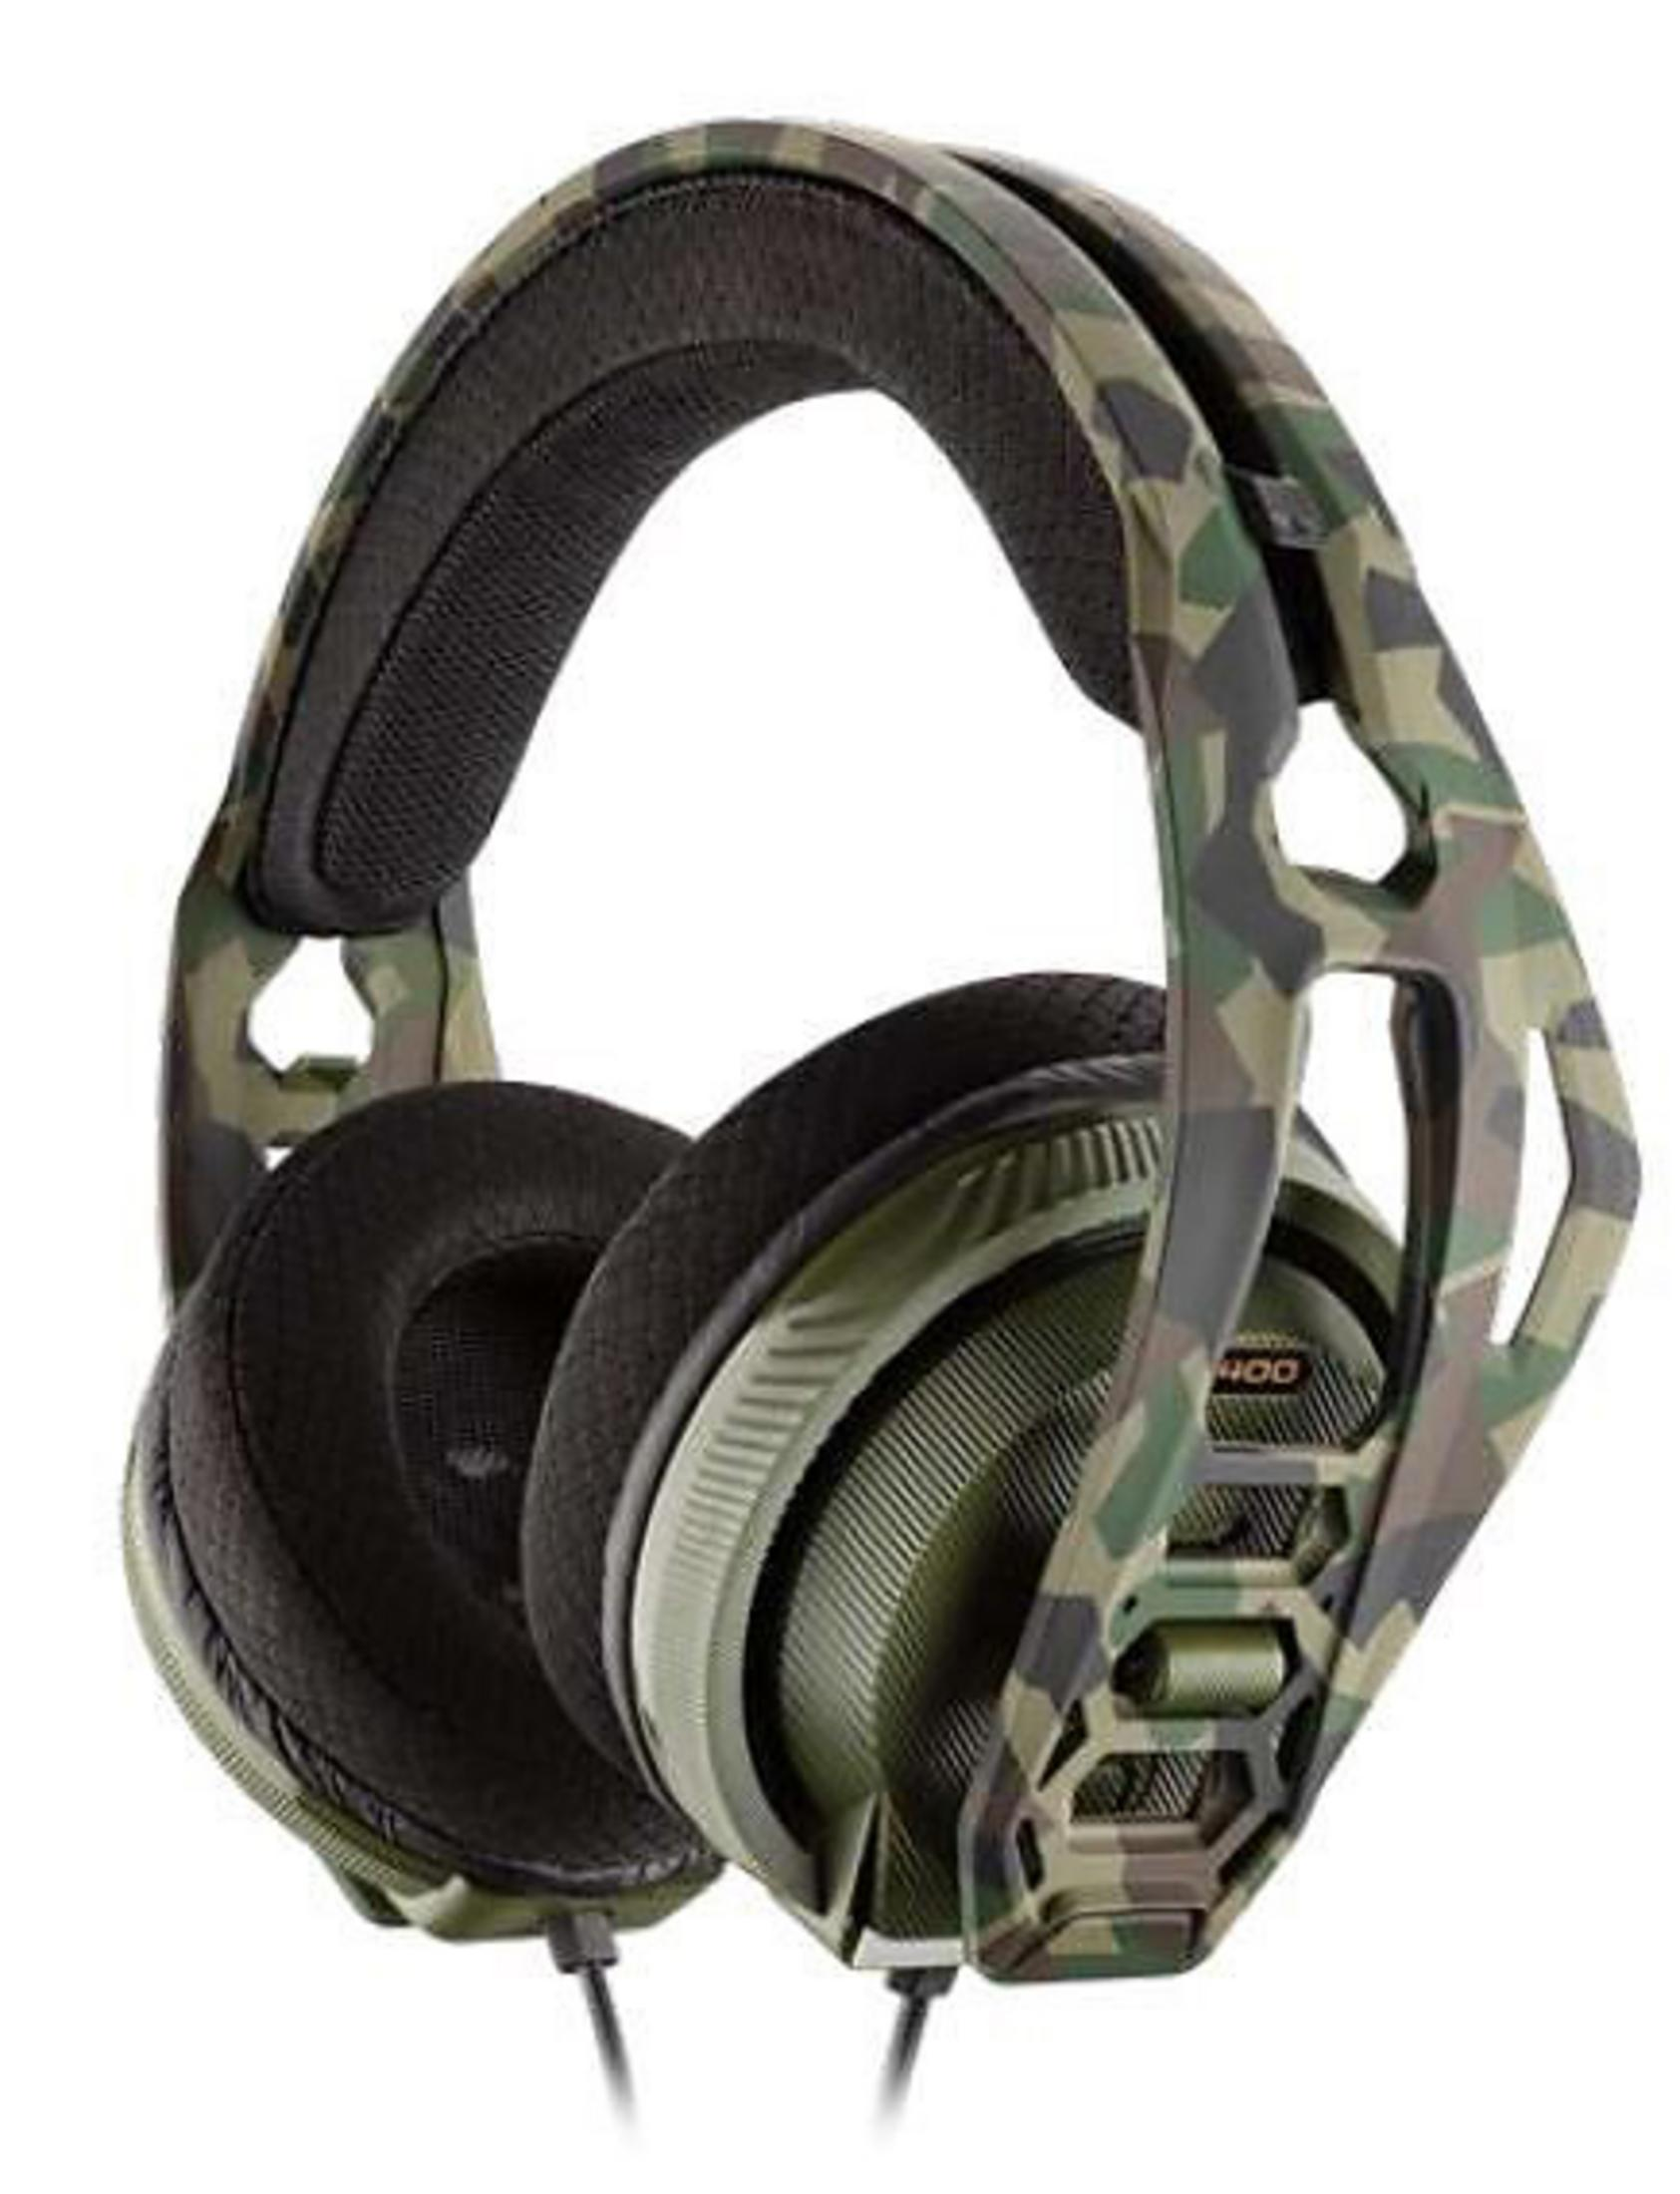 NACON PL053897 RIG 400 Over-ear Headset HX Camogrün CAMO FOREST, Gaming